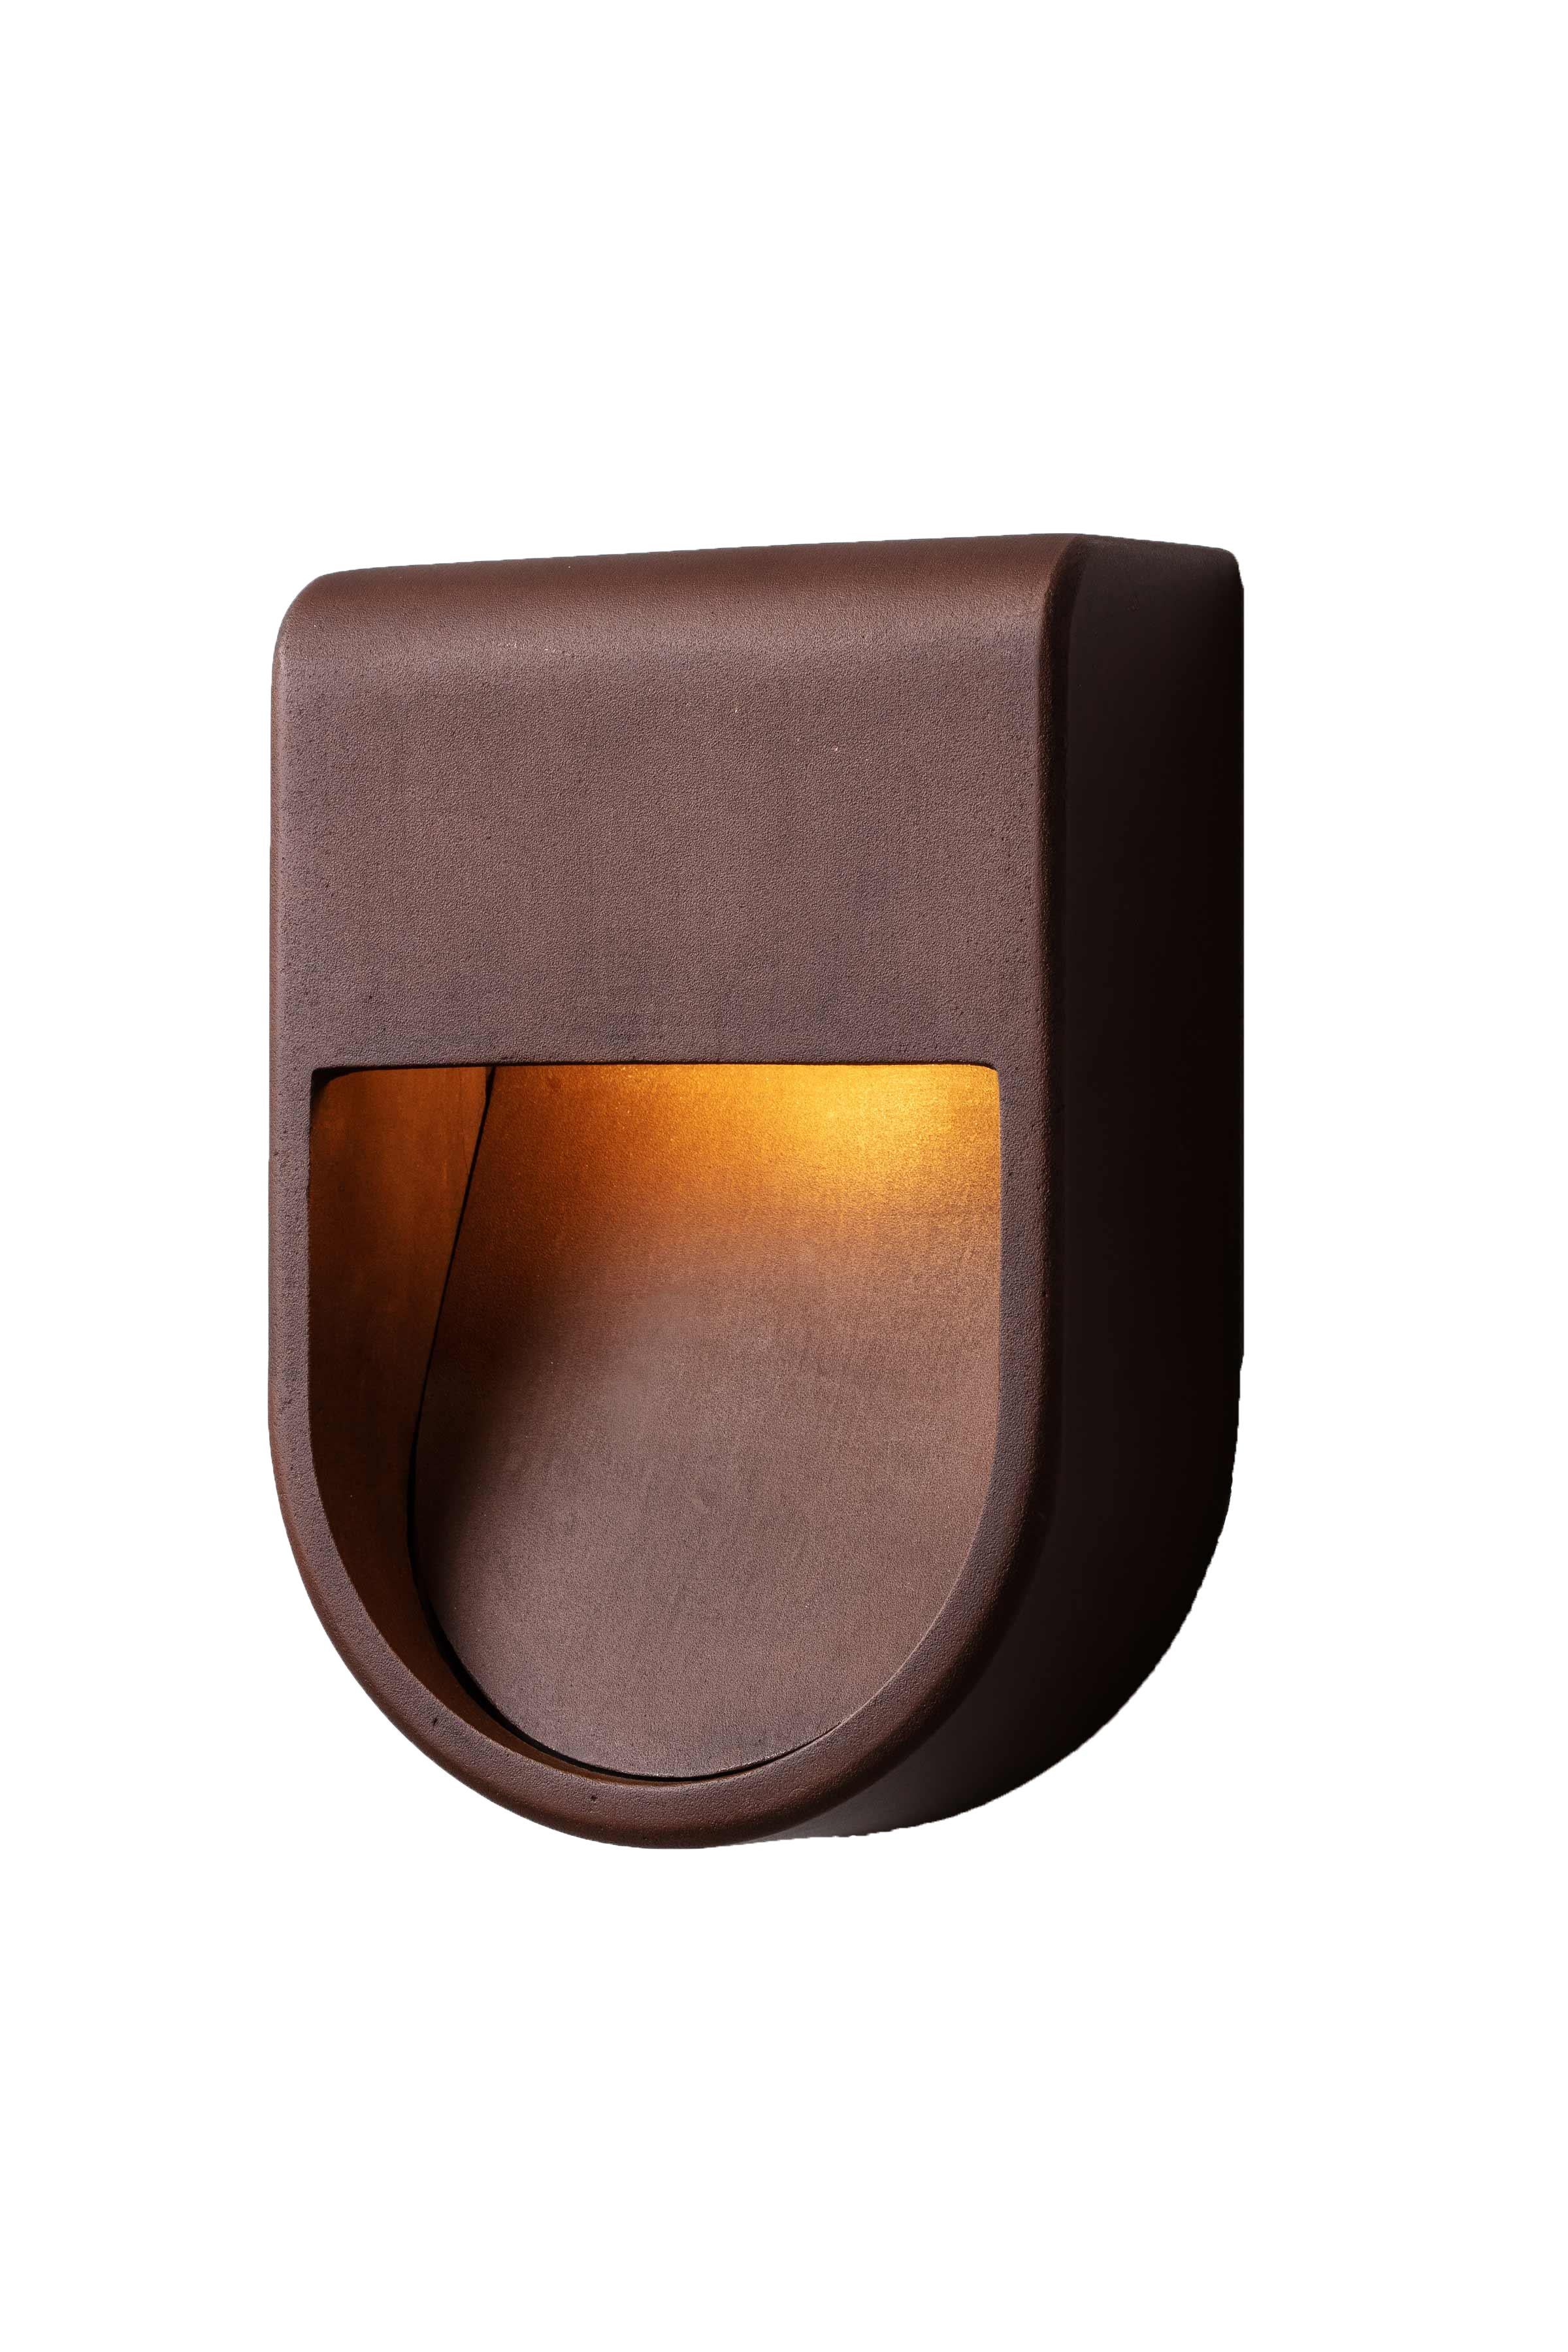 Kyoto Indoor Outdoor Led Cast Sconce Plated Brass Size Wide Wet Rated Light For Sale 5